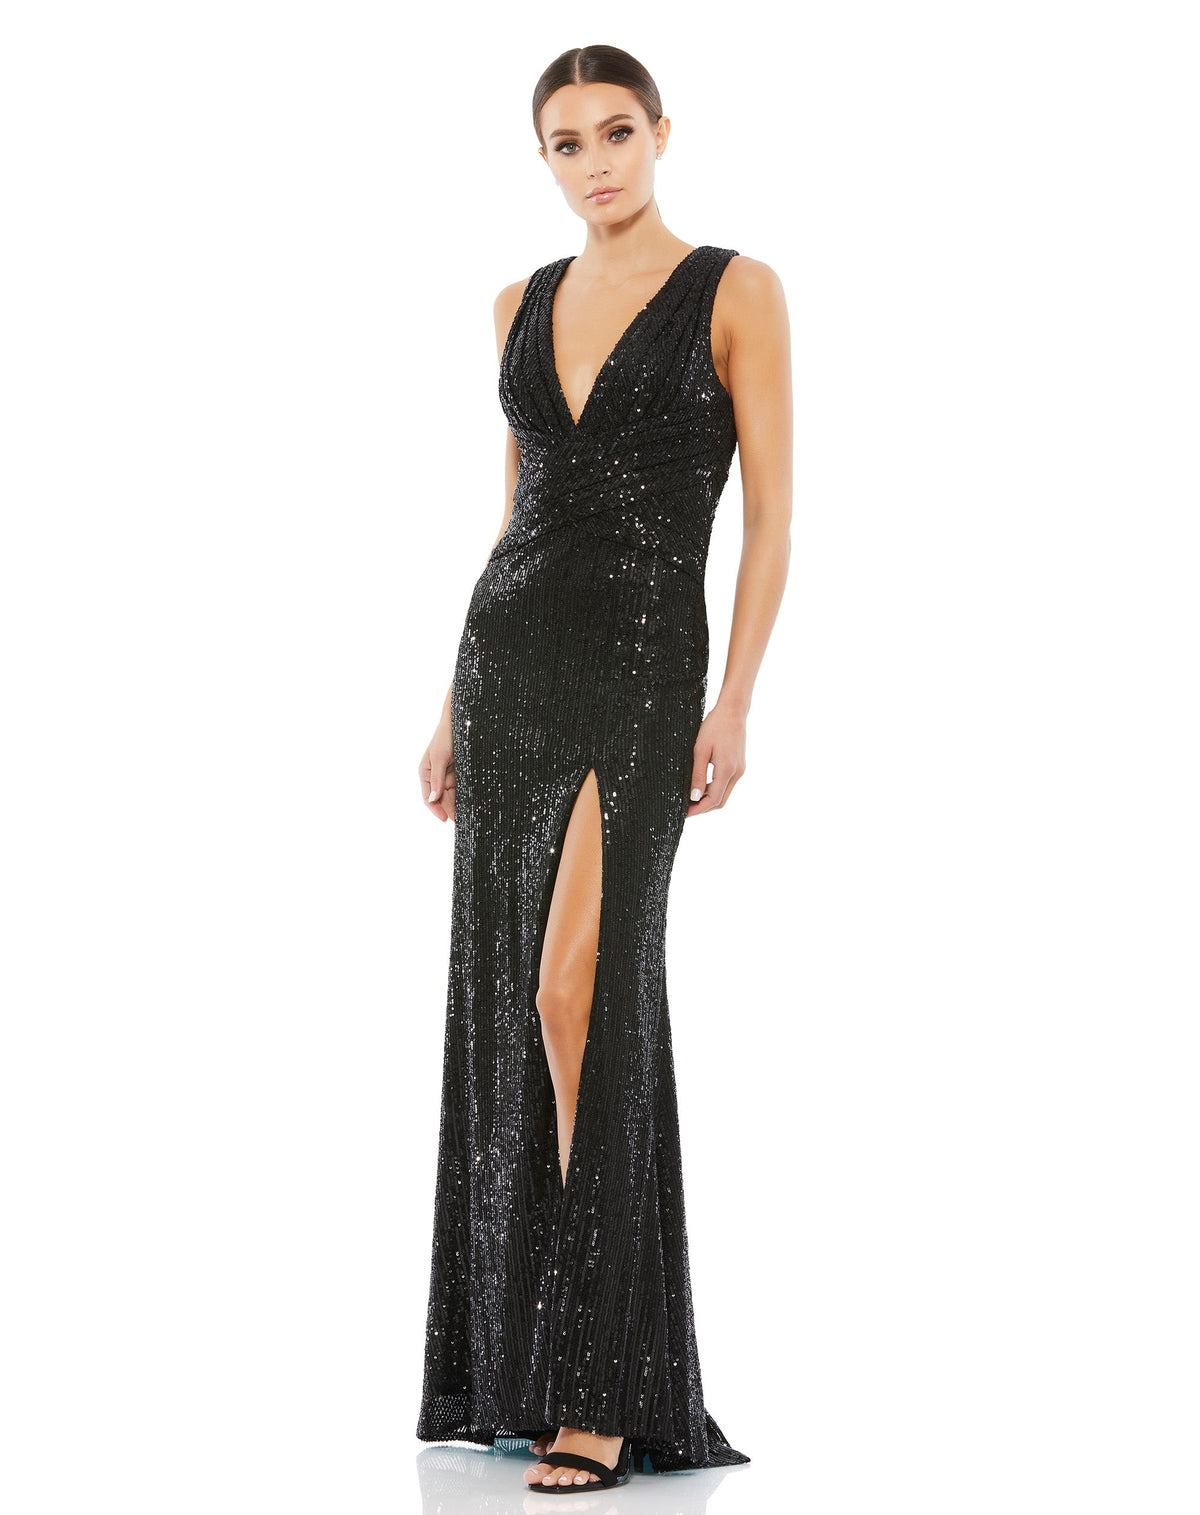 This elegant Mac Duggal, long, black, floor-length sequined gown with a plunging v-neckline, wrap waist, and a thigh-high slit. This elegant evening dress is the perfect dress perfect for proms, black-tie affairs, weddings and special events!